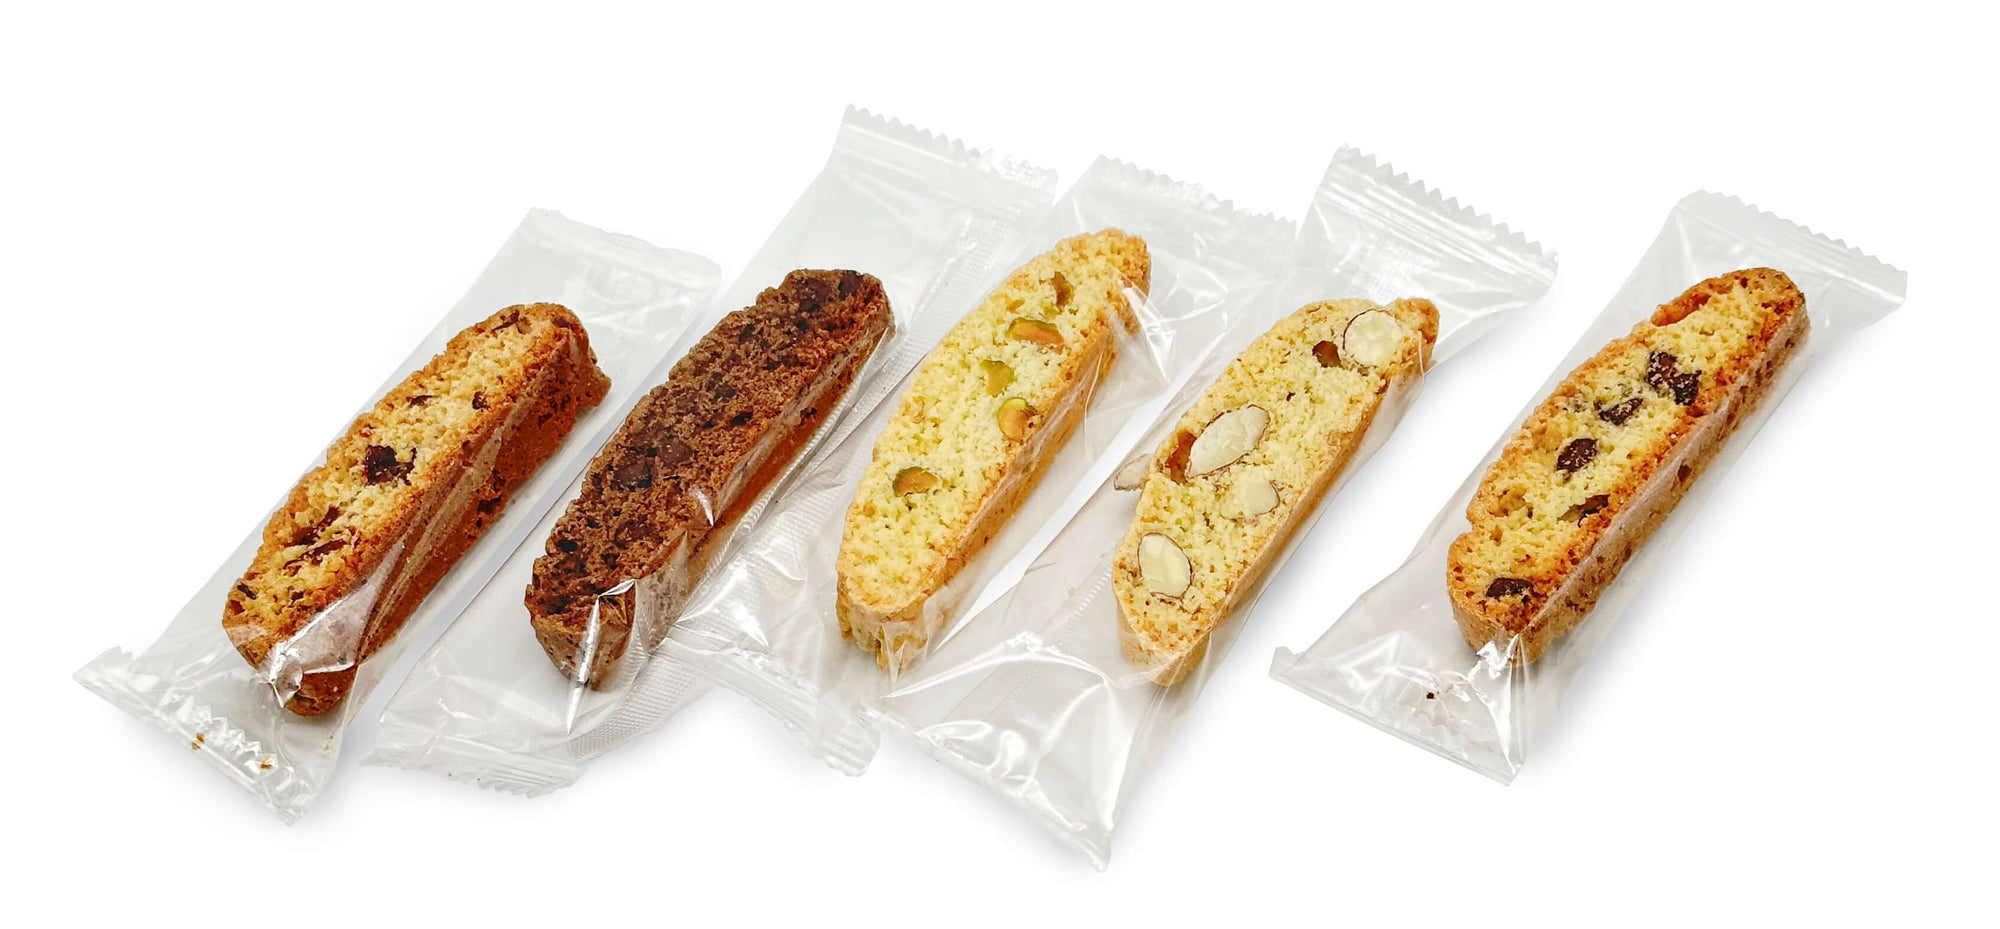 Individually Wrapped Biscotti - Black Box Samples pack - True Delicious | Authentic Italian Desserts